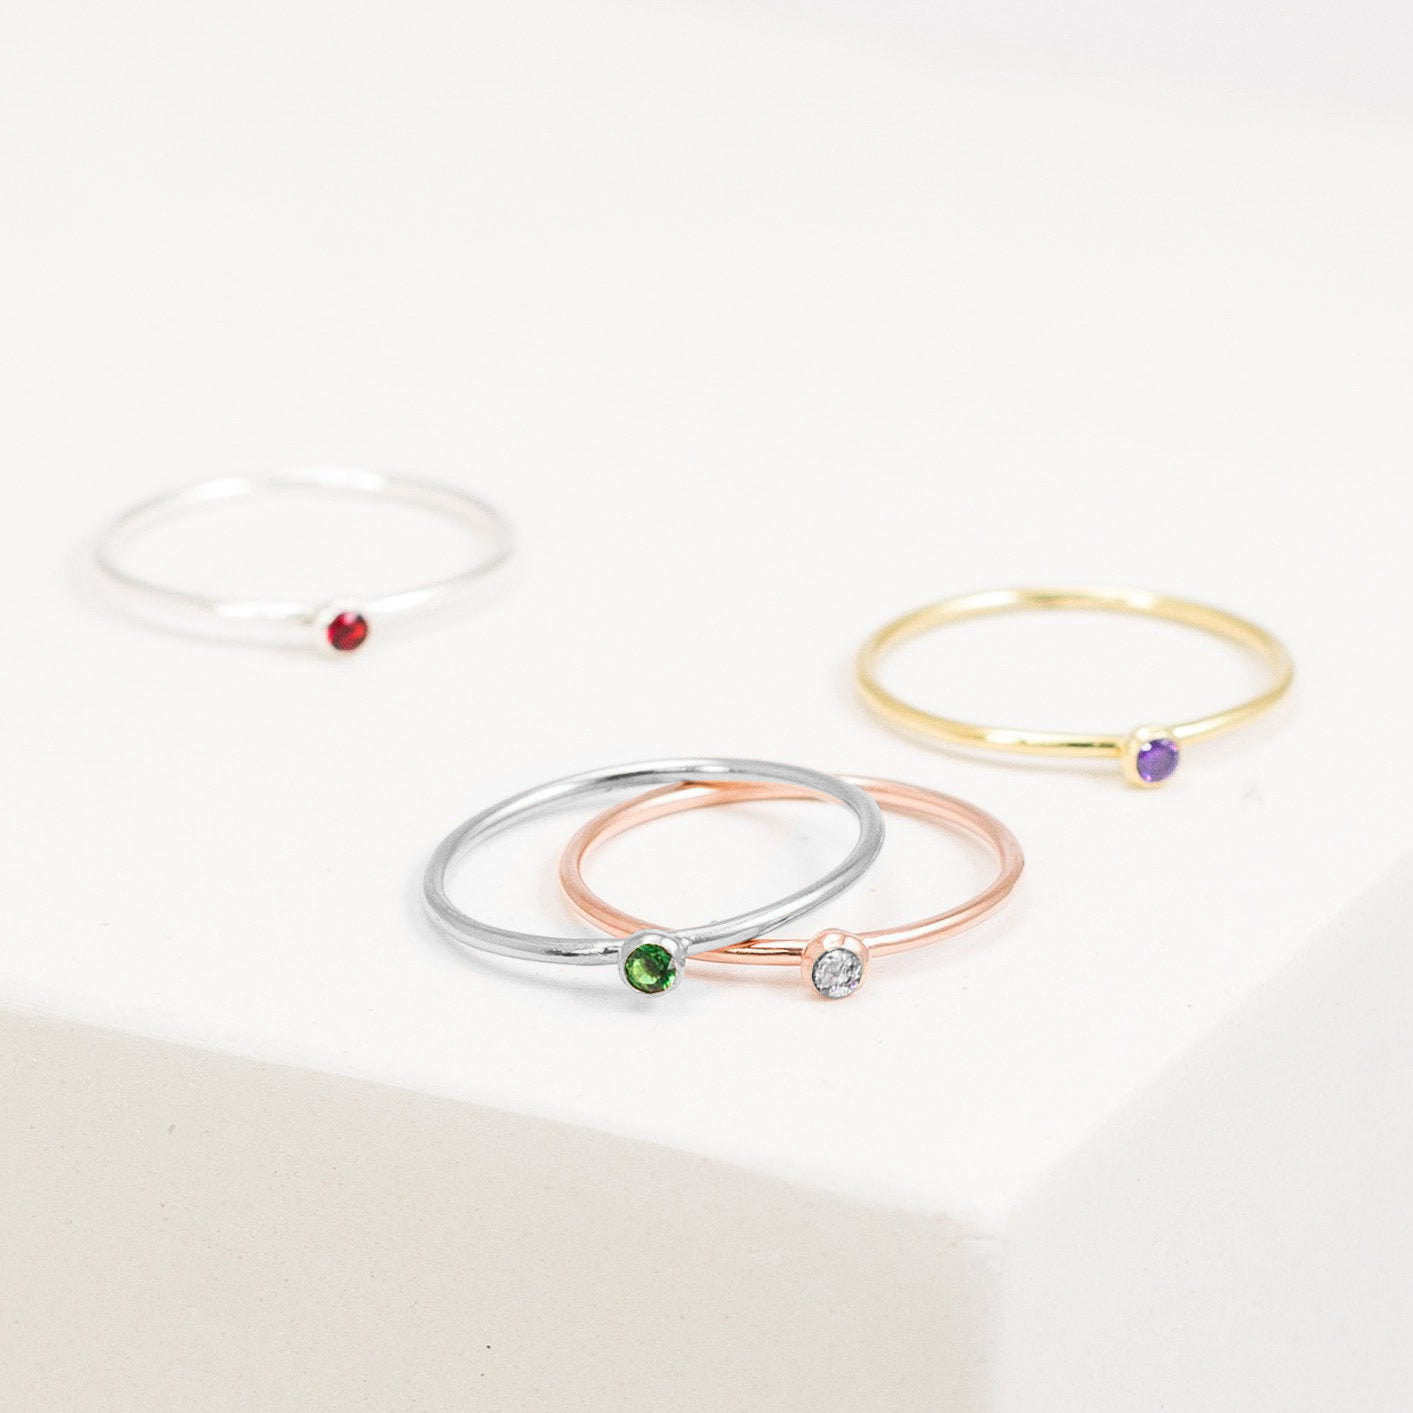 Exquisite Thin Stacking Ring with Birthstone